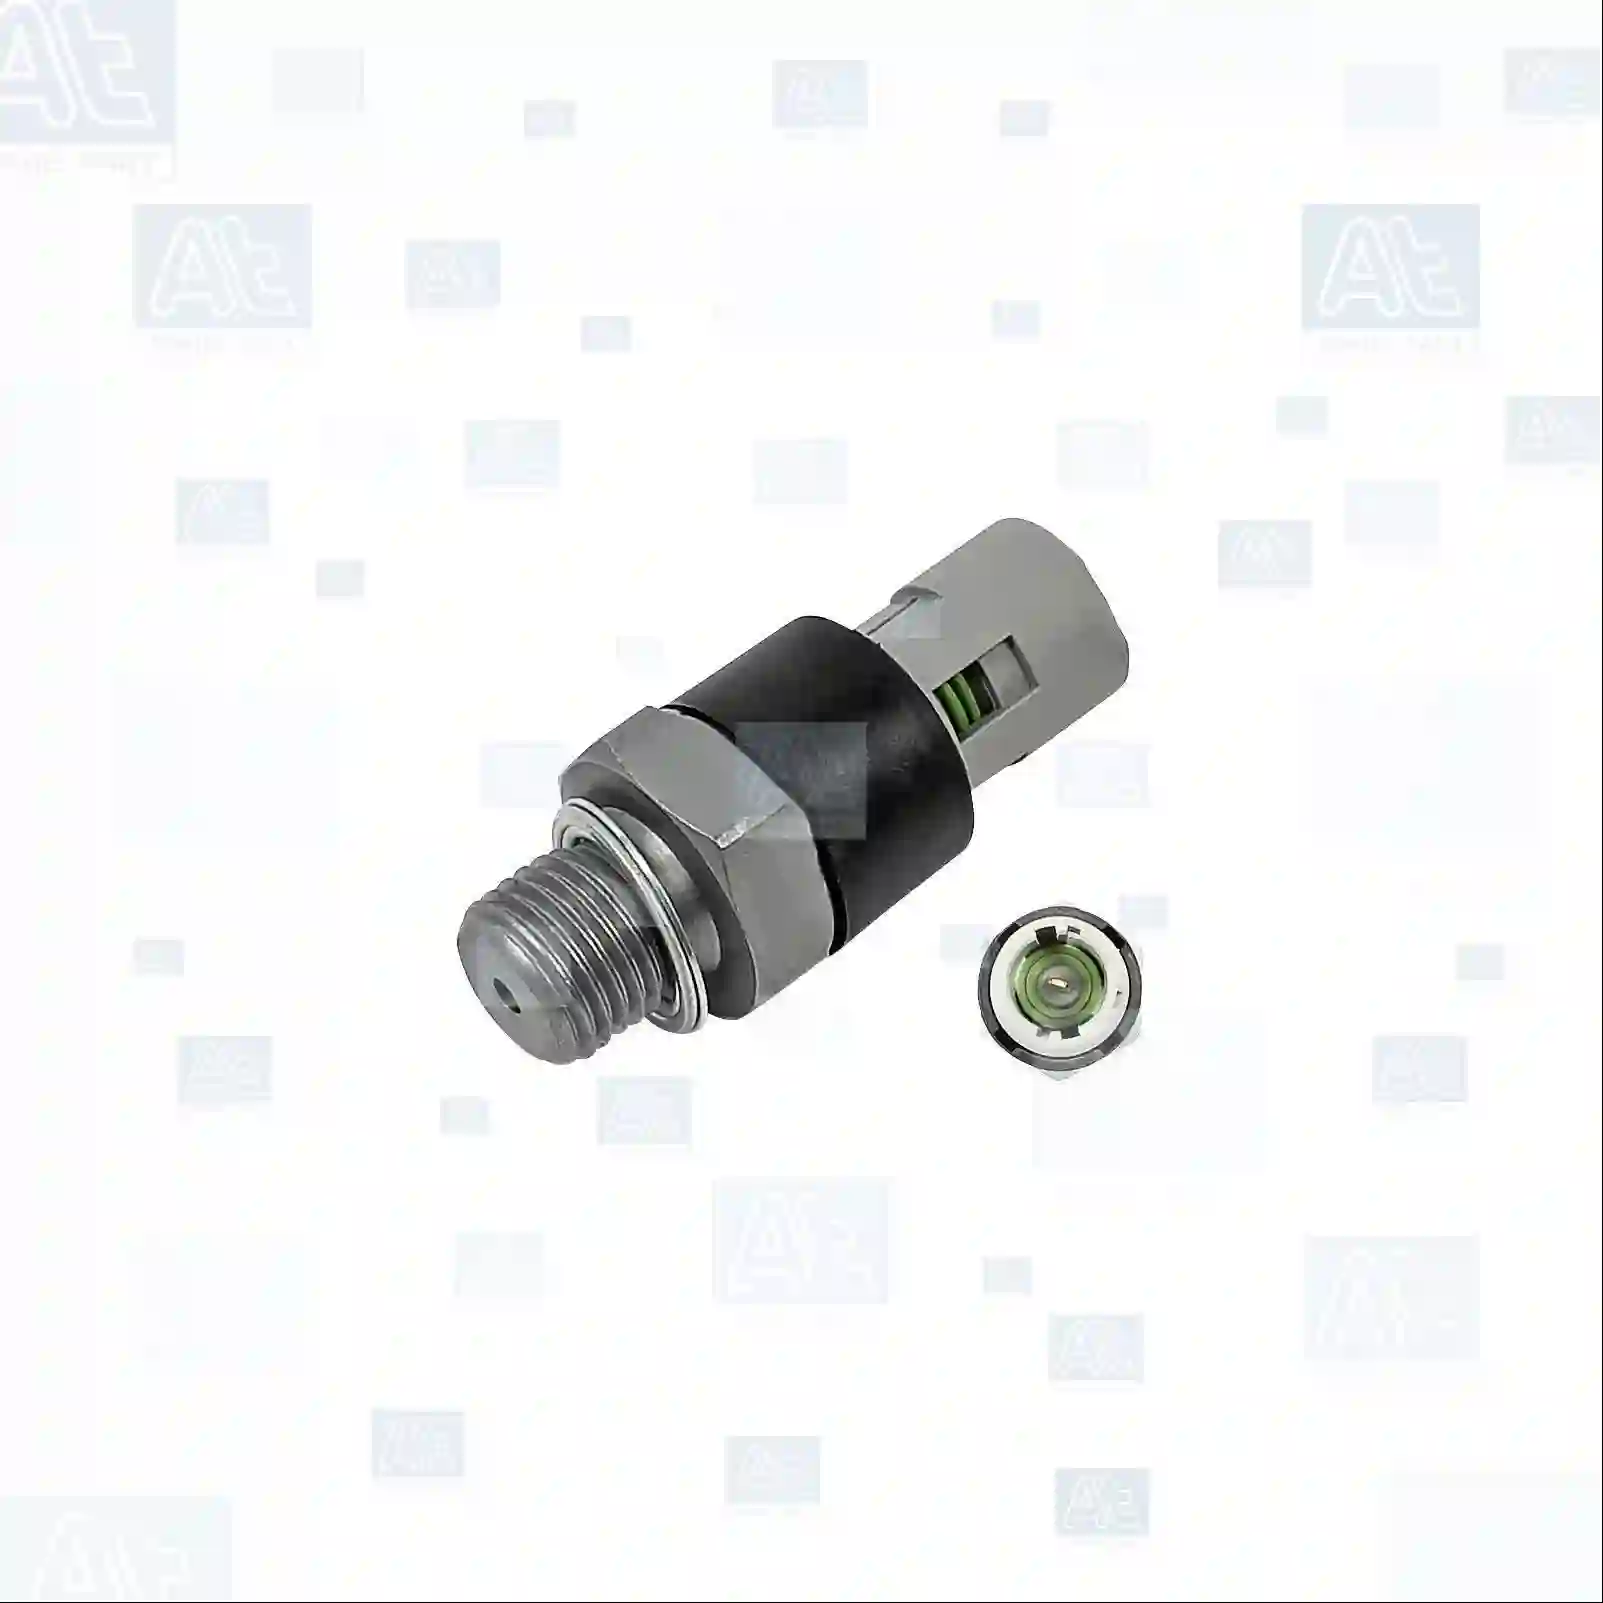 Oil pressure switch, 77700324, 8200026650, 8200670483, 8200671279, 8200970441, 93160284, 93198196, 2263000Q1D, 2263000QAE, 2524000QAB, 25240AW300, 22630-00Q1D, 22630-00QAE, 25240-00Q0B, 25240-00QAB, 25240-AW300, 82000-26650, 4410676, 4433880, 8200026650, 8200670483, 8200671279, 8200970441, 37820-84A00, 37820-84A00-000, 37820-84A01, 37820-84A01-000, 9128771, 91287714 ||  77700324 At Spare Part | Engine, Accelerator Pedal, Camshaft, Connecting Rod, Crankcase, Crankshaft, Cylinder Head, Engine Suspension Mountings, Exhaust Manifold, Exhaust Gas Recirculation, Filter Kits, Flywheel Housing, General Overhaul Kits, Engine, Intake Manifold, Oil Cleaner, Oil Cooler, Oil Filter, Oil Pump, Oil Sump, Piston & Liner, Sensor & Switch, Timing Case, Turbocharger, Cooling System, Belt Tensioner, Coolant Filter, Coolant Pipe, Corrosion Prevention Agent, Drive, Expansion Tank, Fan, Intercooler, Monitors & Gauges, Radiator, Thermostat, V-Belt / Timing belt, Water Pump, Fuel System, Electronical Injector Unit, Feed Pump, Fuel Filter, cpl., Fuel Gauge Sender,  Fuel Line, Fuel Pump, Fuel Tank, Injection Line Kit, Injection Pump, Exhaust System, Clutch & Pedal, Gearbox, Propeller Shaft, Axles, Brake System, Hubs & Wheels, Suspension, Leaf Spring, Universal Parts / Accessories, Steering, Electrical System, Cabin Oil pressure switch, 77700324, 8200026650, 8200670483, 8200671279, 8200970441, 93160284, 93198196, 2263000Q1D, 2263000QAE, 2524000QAB, 25240AW300, 22630-00Q1D, 22630-00QAE, 25240-00Q0B, 25240-00QAB, 25240-AW300, 82000-26650, 4410676, 4433880, 8200026650, 8200670483, 8200671279, 8200970441, 37820-84A00, 37820-84A00-000, 37820-84A01, 37820-84A01-000, 9128771, 91287714 ||  77700324 At Spare Part | Engine, Accelerator Pedal, Camshaft, Connecting Rod, Crankcase, Crankshaft, Cylinder Head, Engine Suspension Mountings, Exhaust Manifold, Exhaust Gas Recirculation, Filter Kits, Flywheel Housing, General Overhaul Kits, Engine, Intake Manifold, Oil Cleaner, Oil Cooler, Oil Filter, Oil Pump, Oil Sump, Piston & Liner, Sensor & Switch, Timing Case, Turbocharger, Cooling System, Belt Tensioner, Coolant Filter, Coolant Pipe, Corrosion Prevention Agent, Drive, Expansion Tank, Fan, Intercooler, Monitors & Gauges, Radiator, Thermostat, V-Belt / Timing belt, Water Pump, Fuel System, Electronical Injector Unit, Feed Pump, Fuel Filter, cpl., Fuel Gauge Sender,  Fuel Line, Fuel Pump, Fuel Tank, Injection Line Kit, Injection Pump, Exhaust System, Clutch & Pedal, Gearbox, Propeller Shaft, Axles, Brake System, Hubs & Wheels, Suspension, Leaf Spring, Universal Parts / Accessories, Steering, Electrical System, Cabin